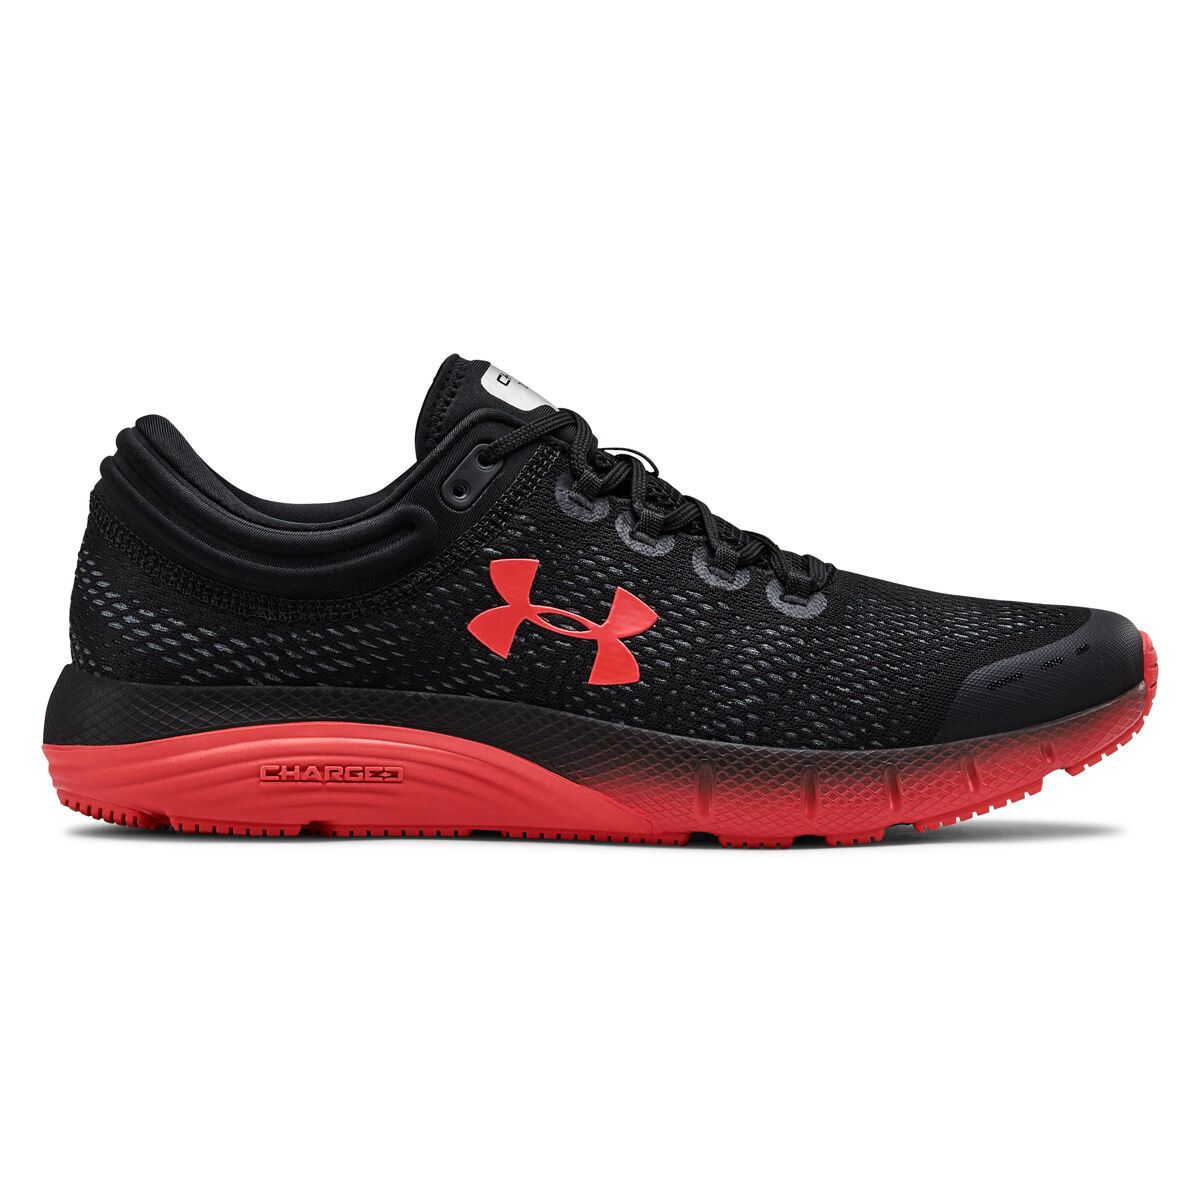 under armour red sneakers